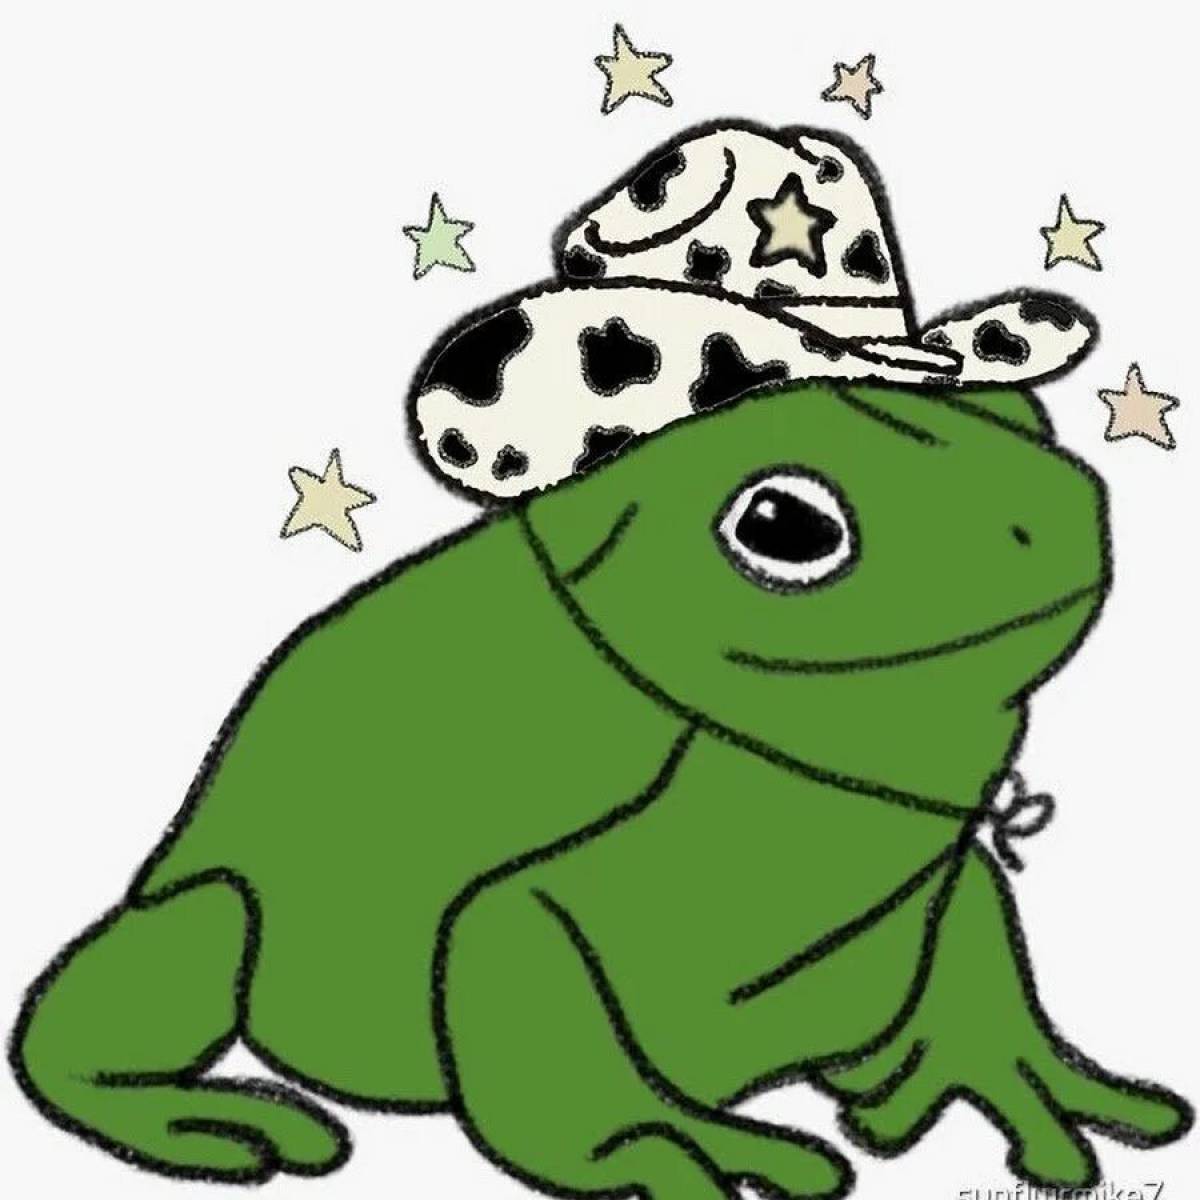 Cute frog from pinterest #3